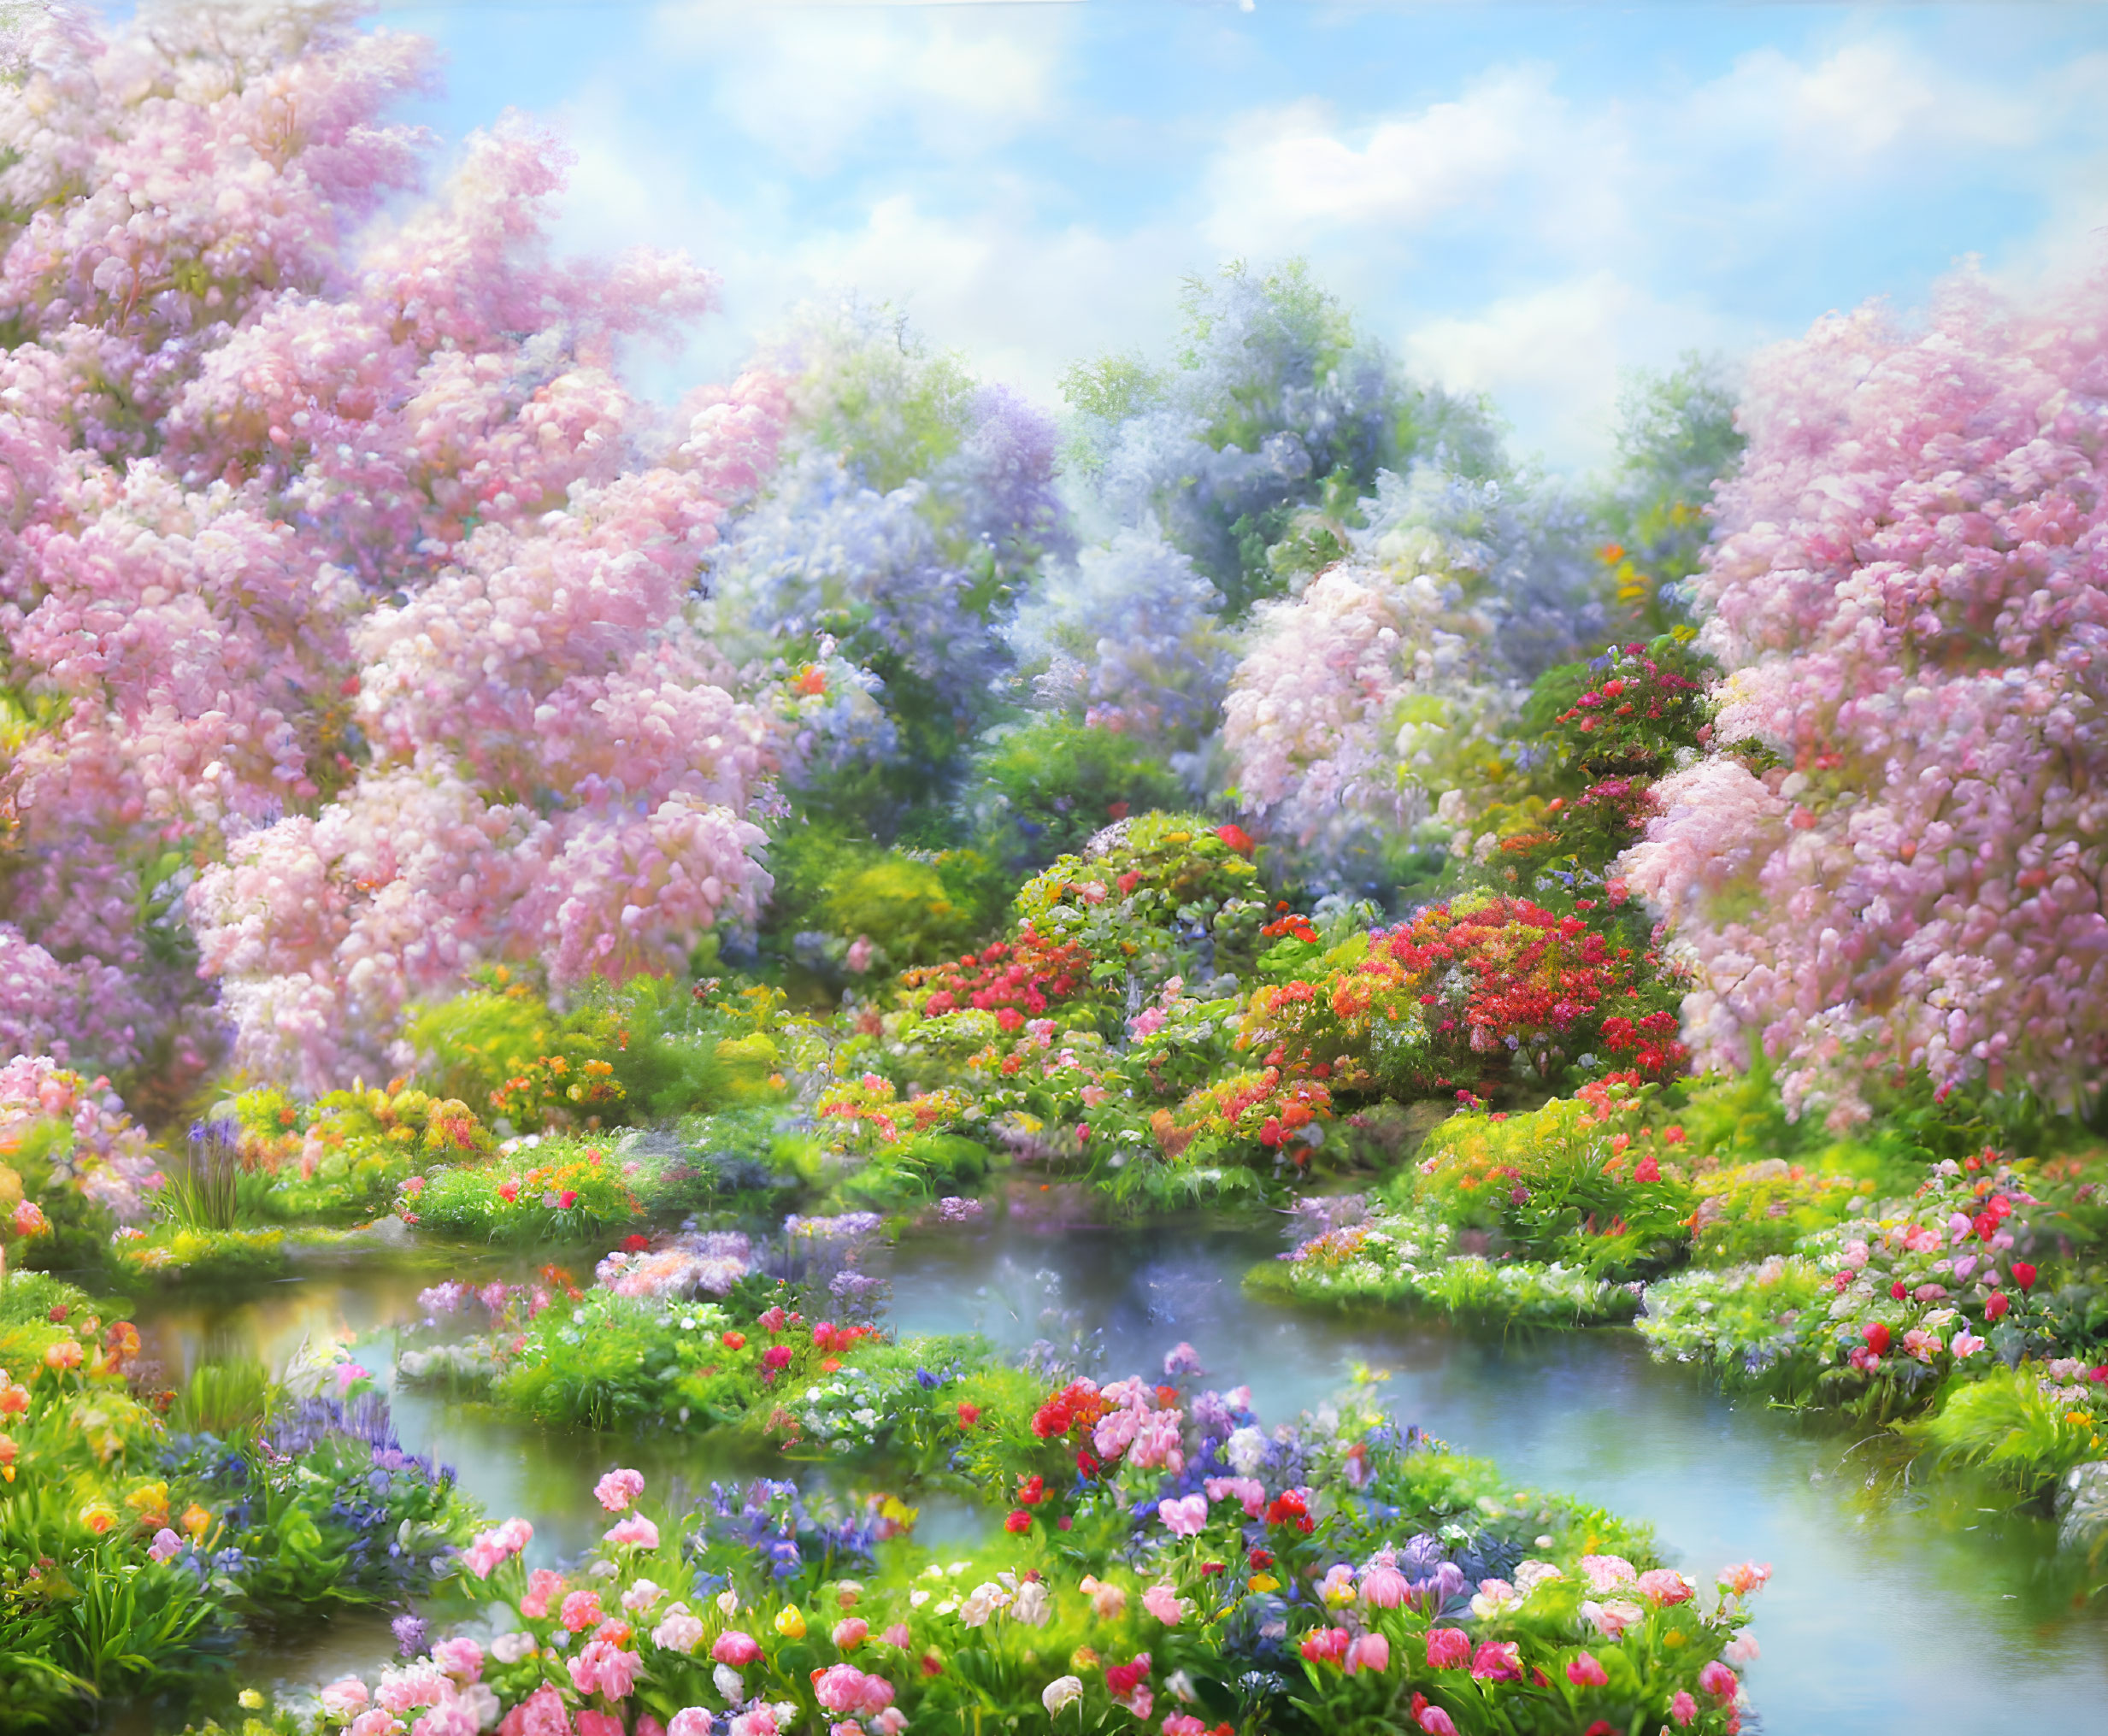 Lush Garden with Colorful Flowers and Serene Pond